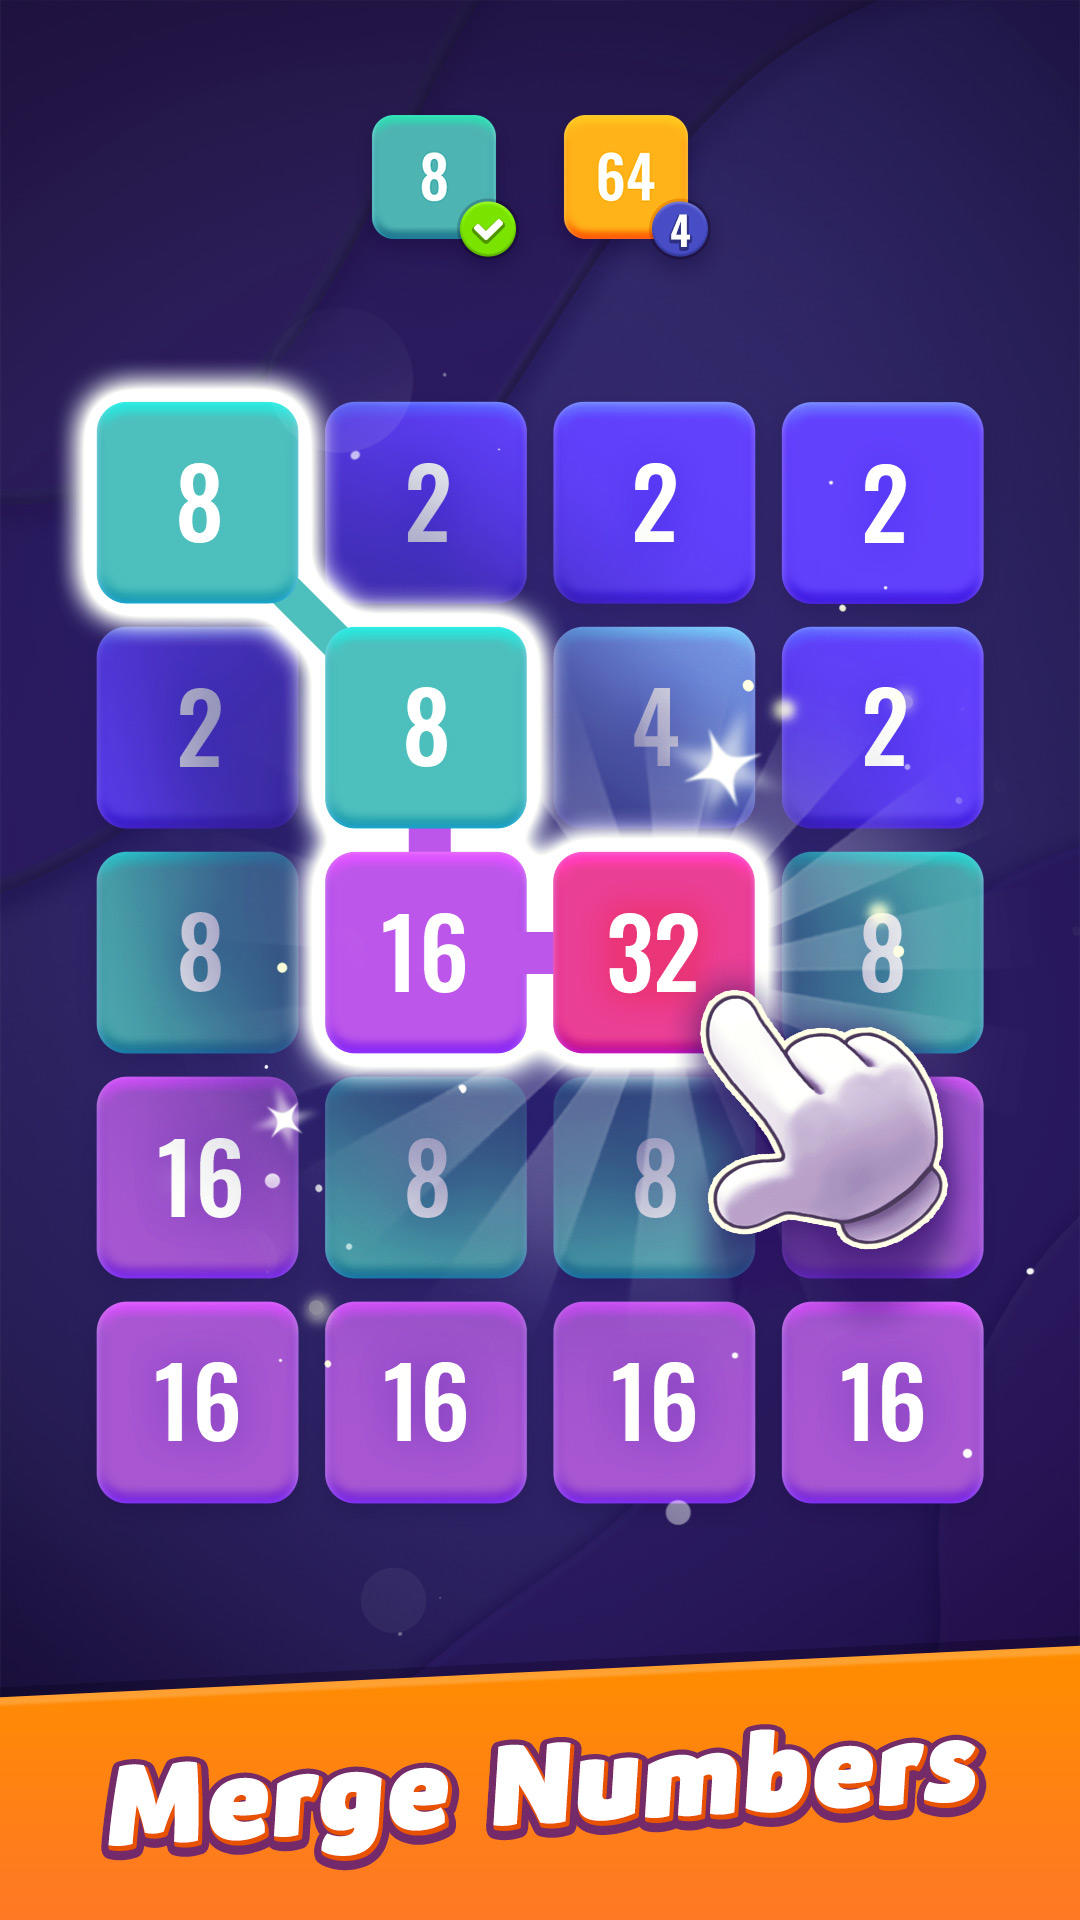 Number Games-2048 Blocks Game for Android - Download